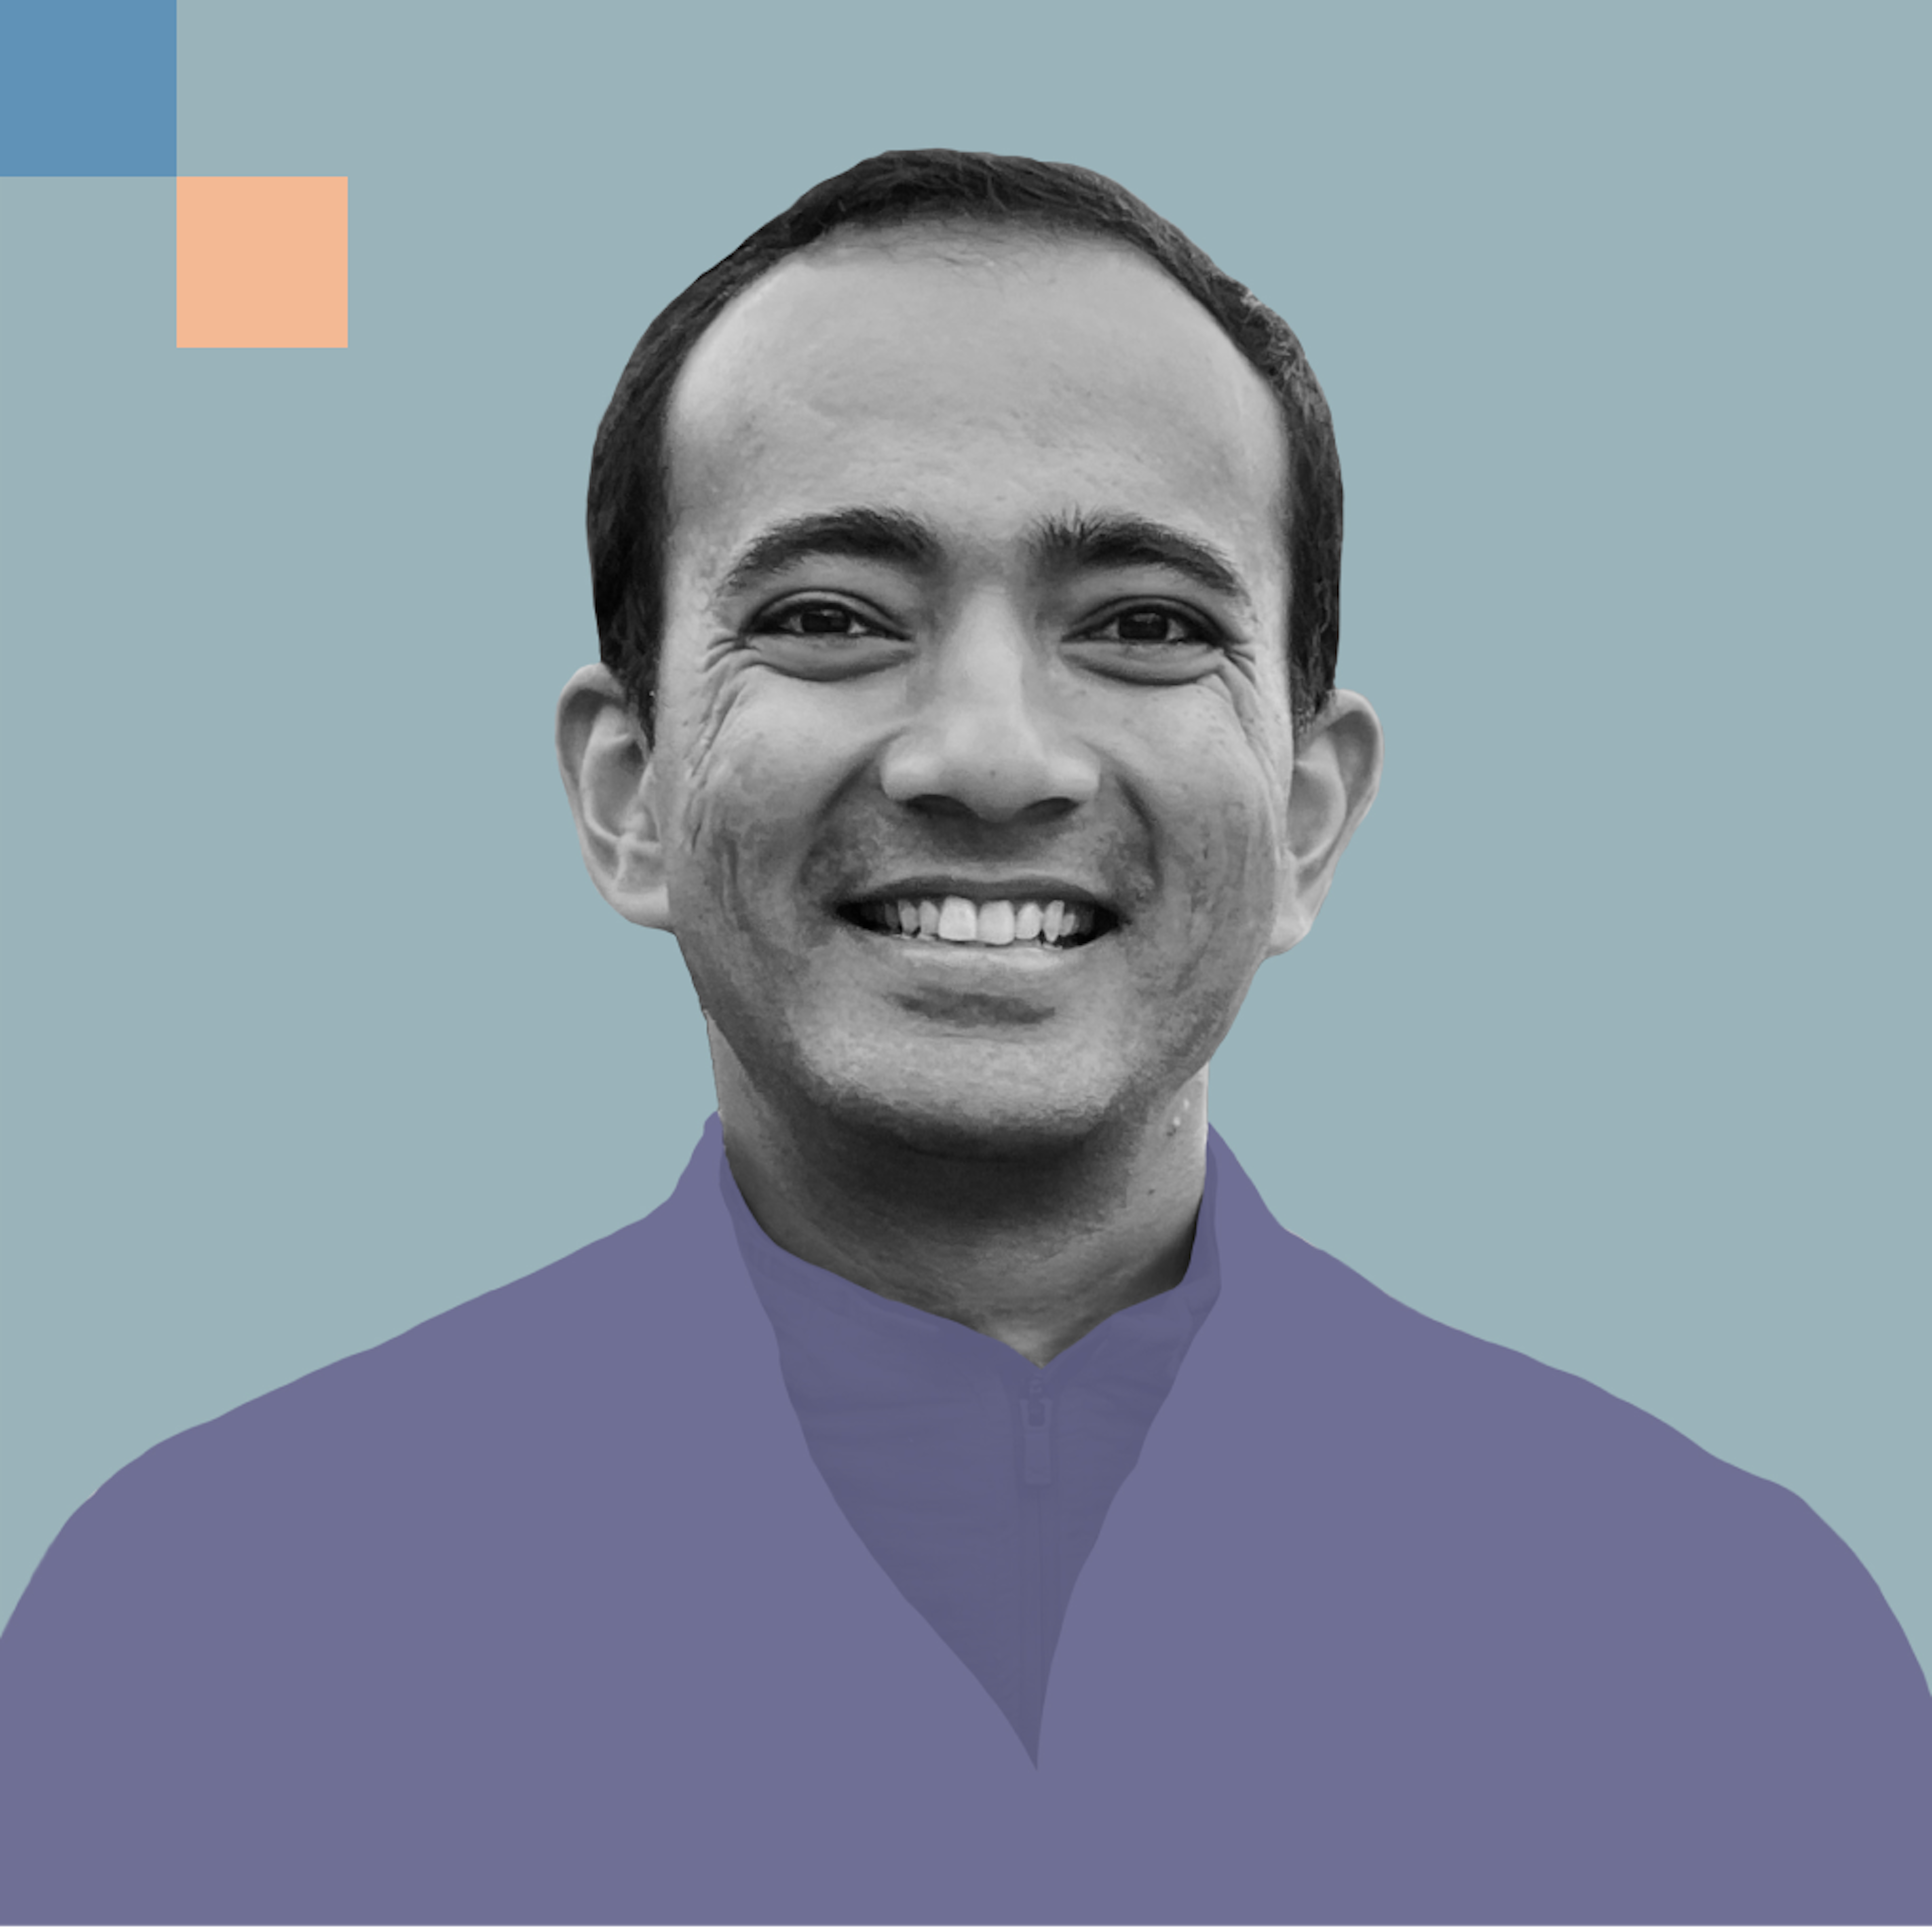 Portrait of Parthsarathi Trivedi, CEO of Skyly, who extends connectivity everywhere for Internet of Things devices.